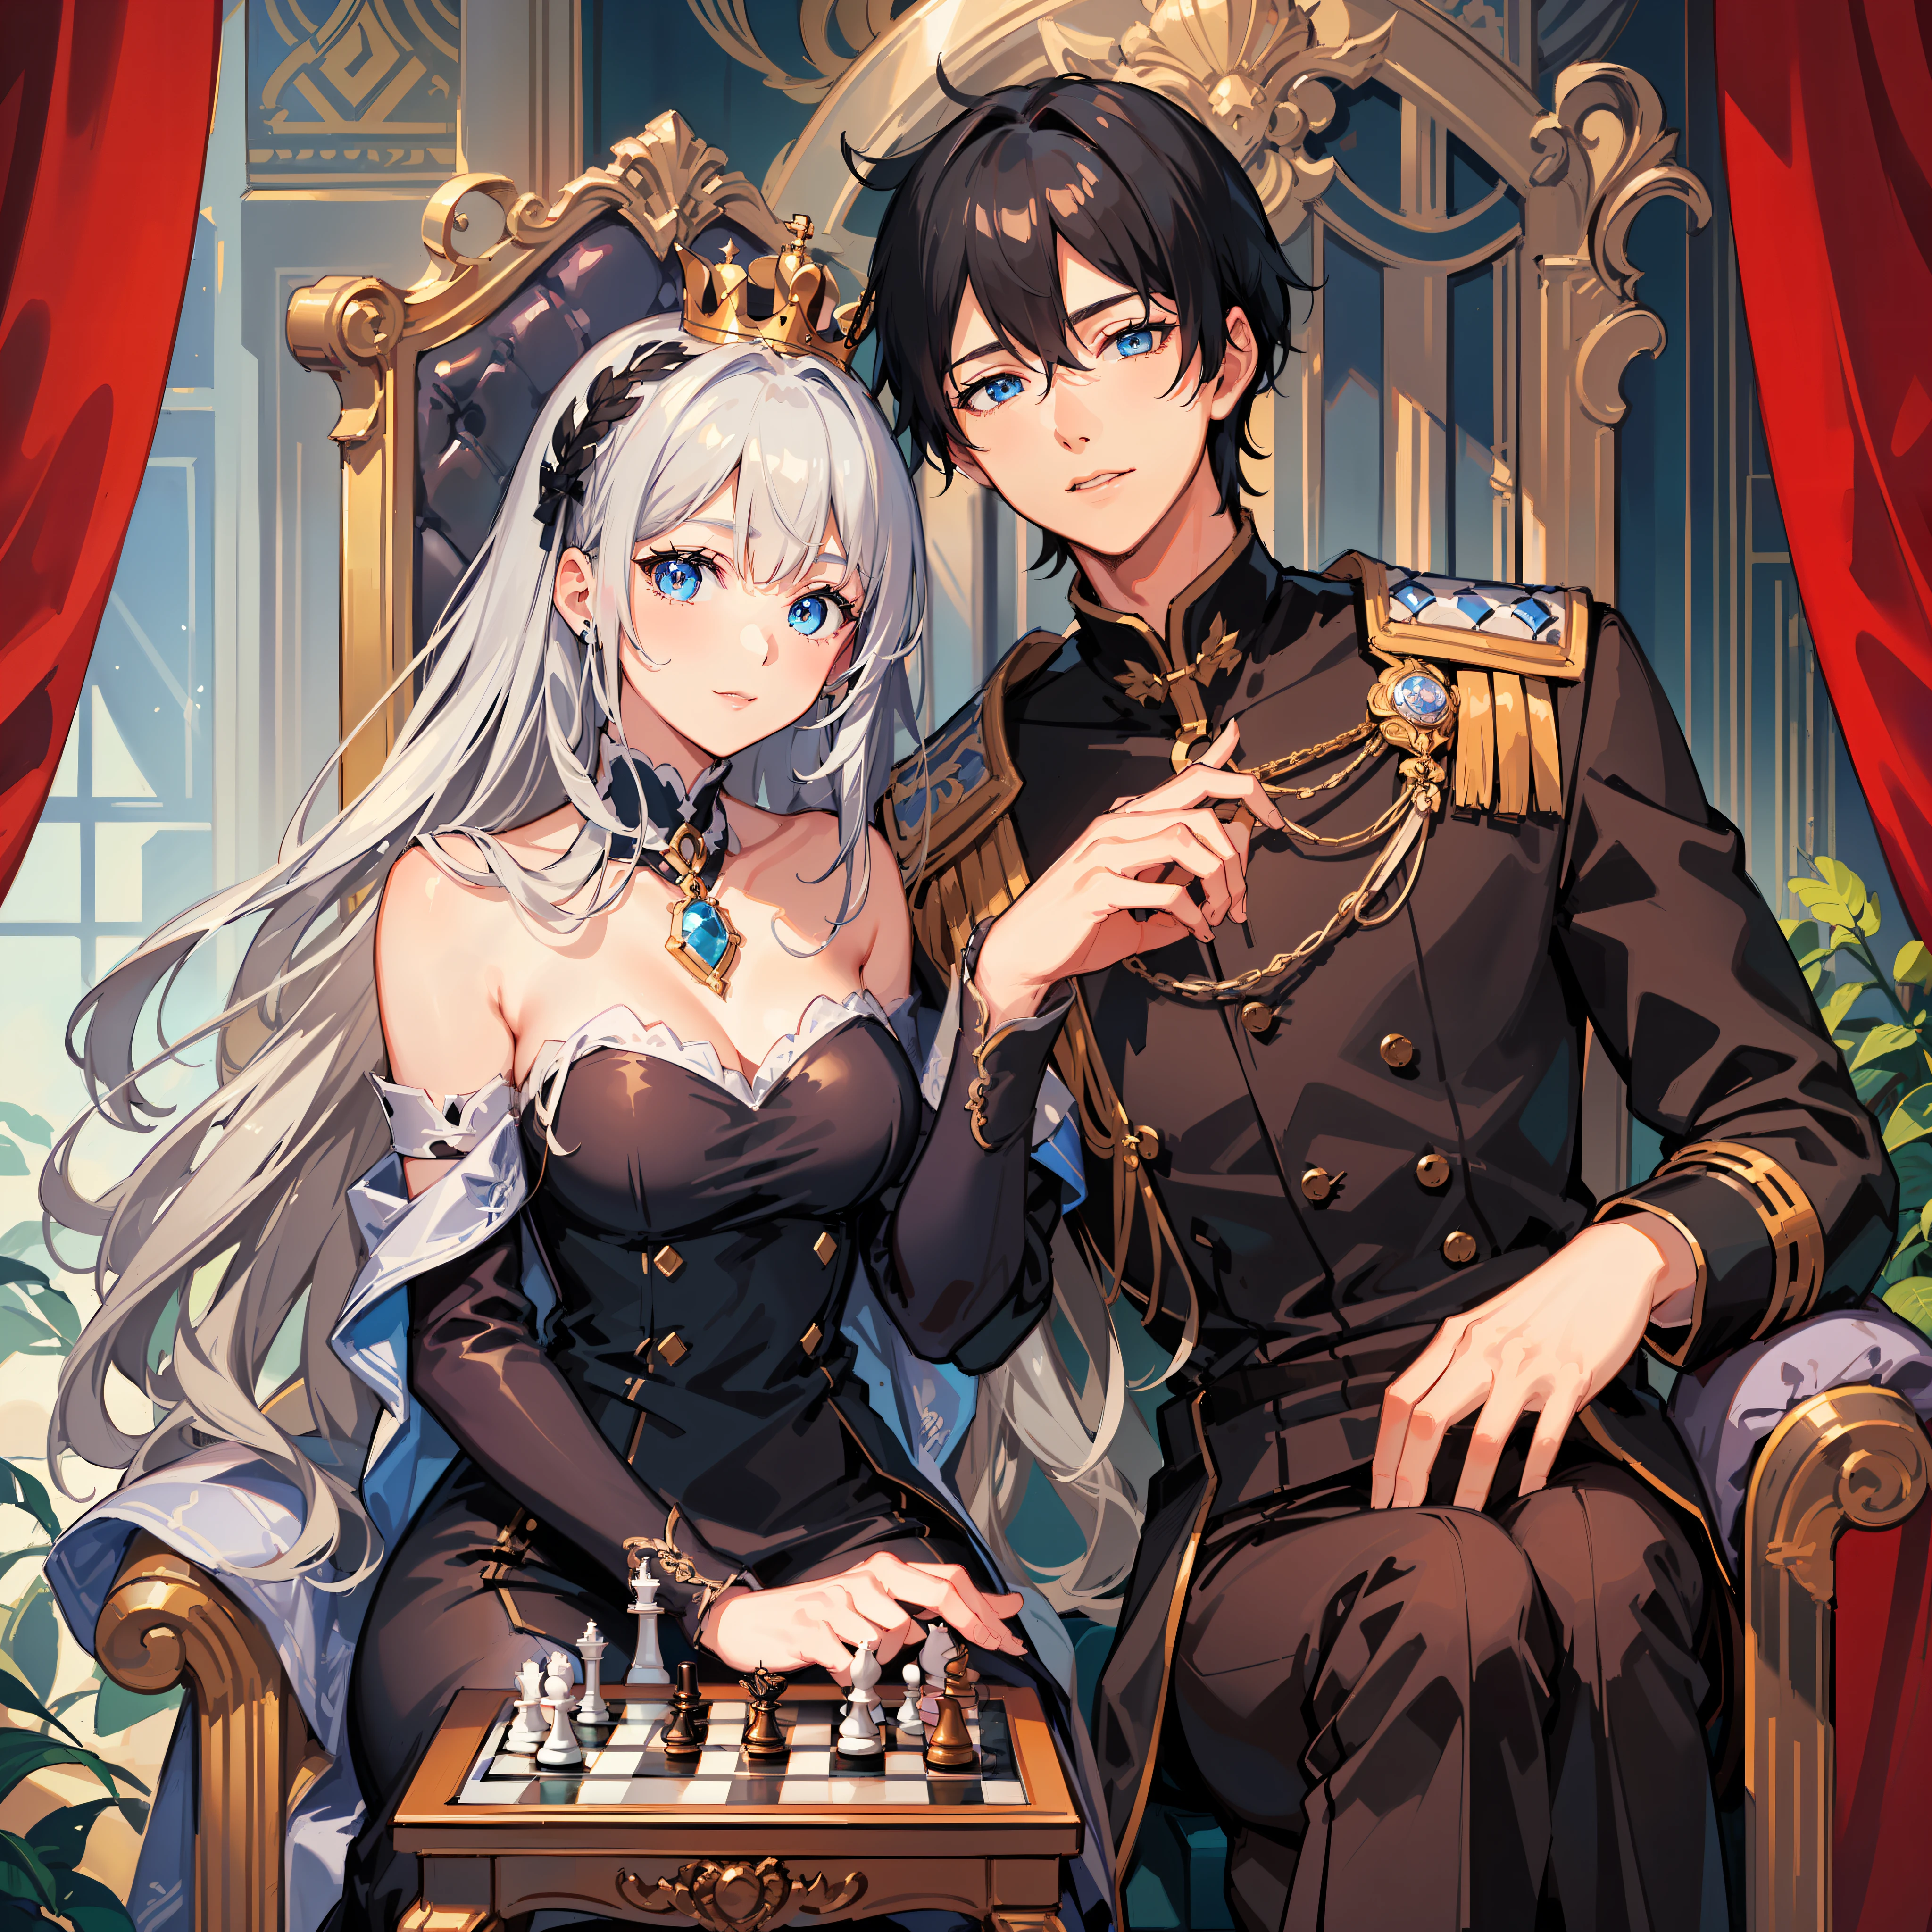 ((Masterpiece: 1.2, top quality, 8k, HD)), ((2 people)), (a couple, a lover, holding hand ((1 female, silver hair, blue eyes (beautiful)), ((chess board)), ((1 male, black hair, blue eyes, handsome, (masculine) ))), ((fantasy academy uniform)), medieval, magic, fantasy vibe, natural smile, soft lighting, chess piecess, detailed accessories, chess symbol badge, for novel cover, big dreamy eyes, chess table, the woman sitting on the throne, the man standing on the back, good proportion, well drawn chess, detailed face, detailed hand, queen and king